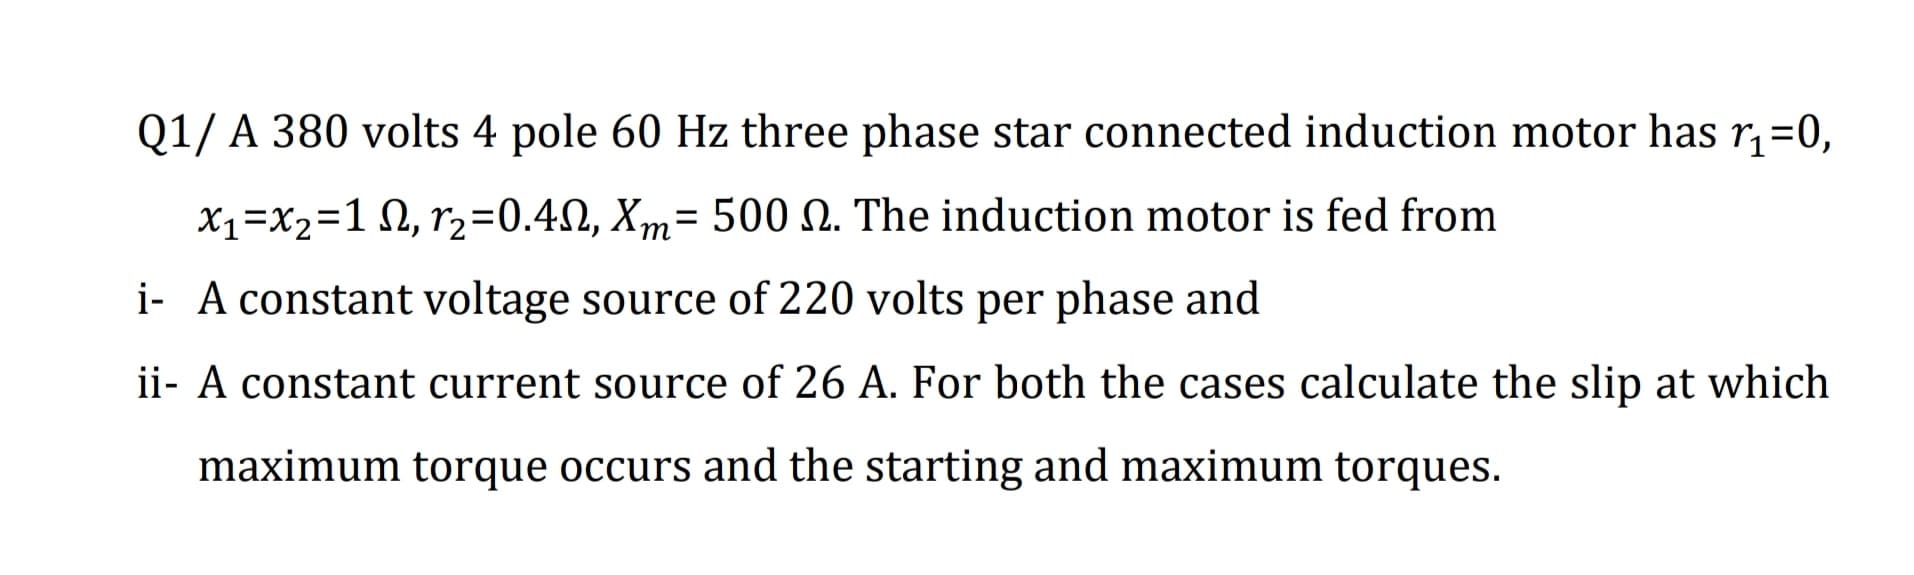 Q1/ A 380 volts 4 pole 60 Hz three phase star connected induction motor has r,=0,
X1=X2=1 N, r2=0.4N, Xm= 500 N. The induction motor is fed from
%D
т
i- A constant voltage source of 220 volts per phase and
ii- A constant current source of 26 A. For both the cases calculate the slip at which
maximum torque occurs and the starting and maximum torques.
